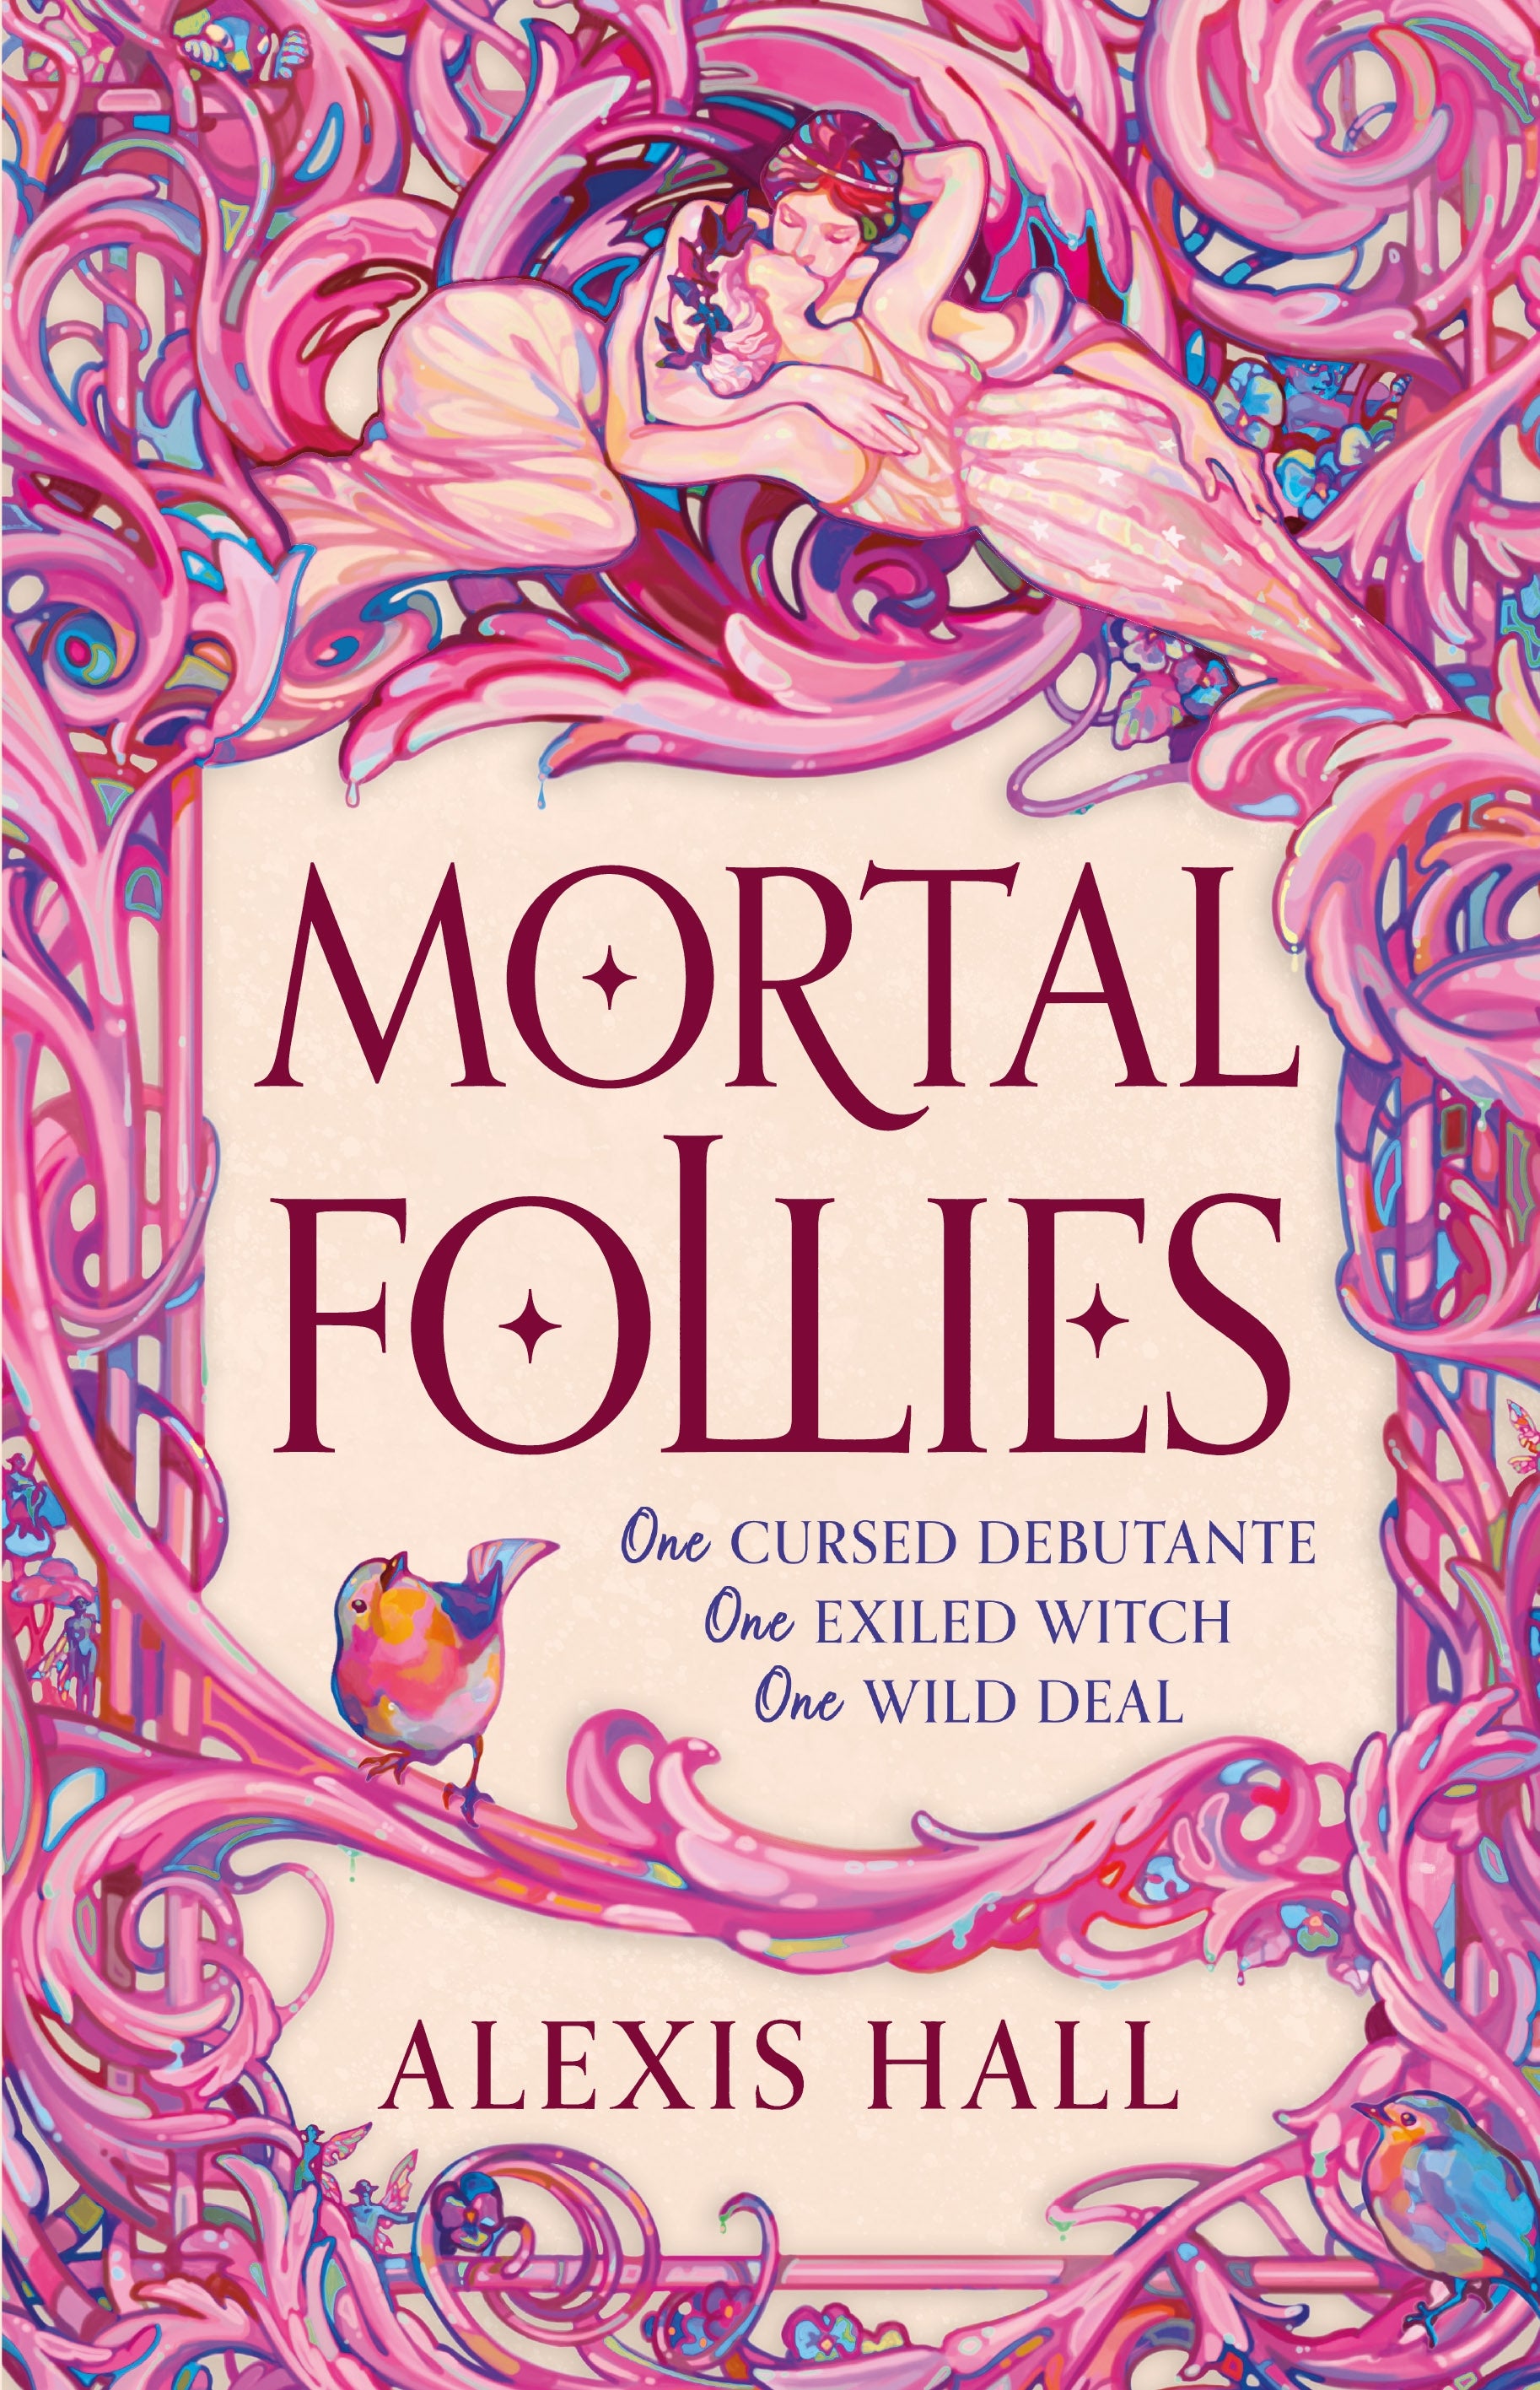 Mortal Follies by Alexis Hall